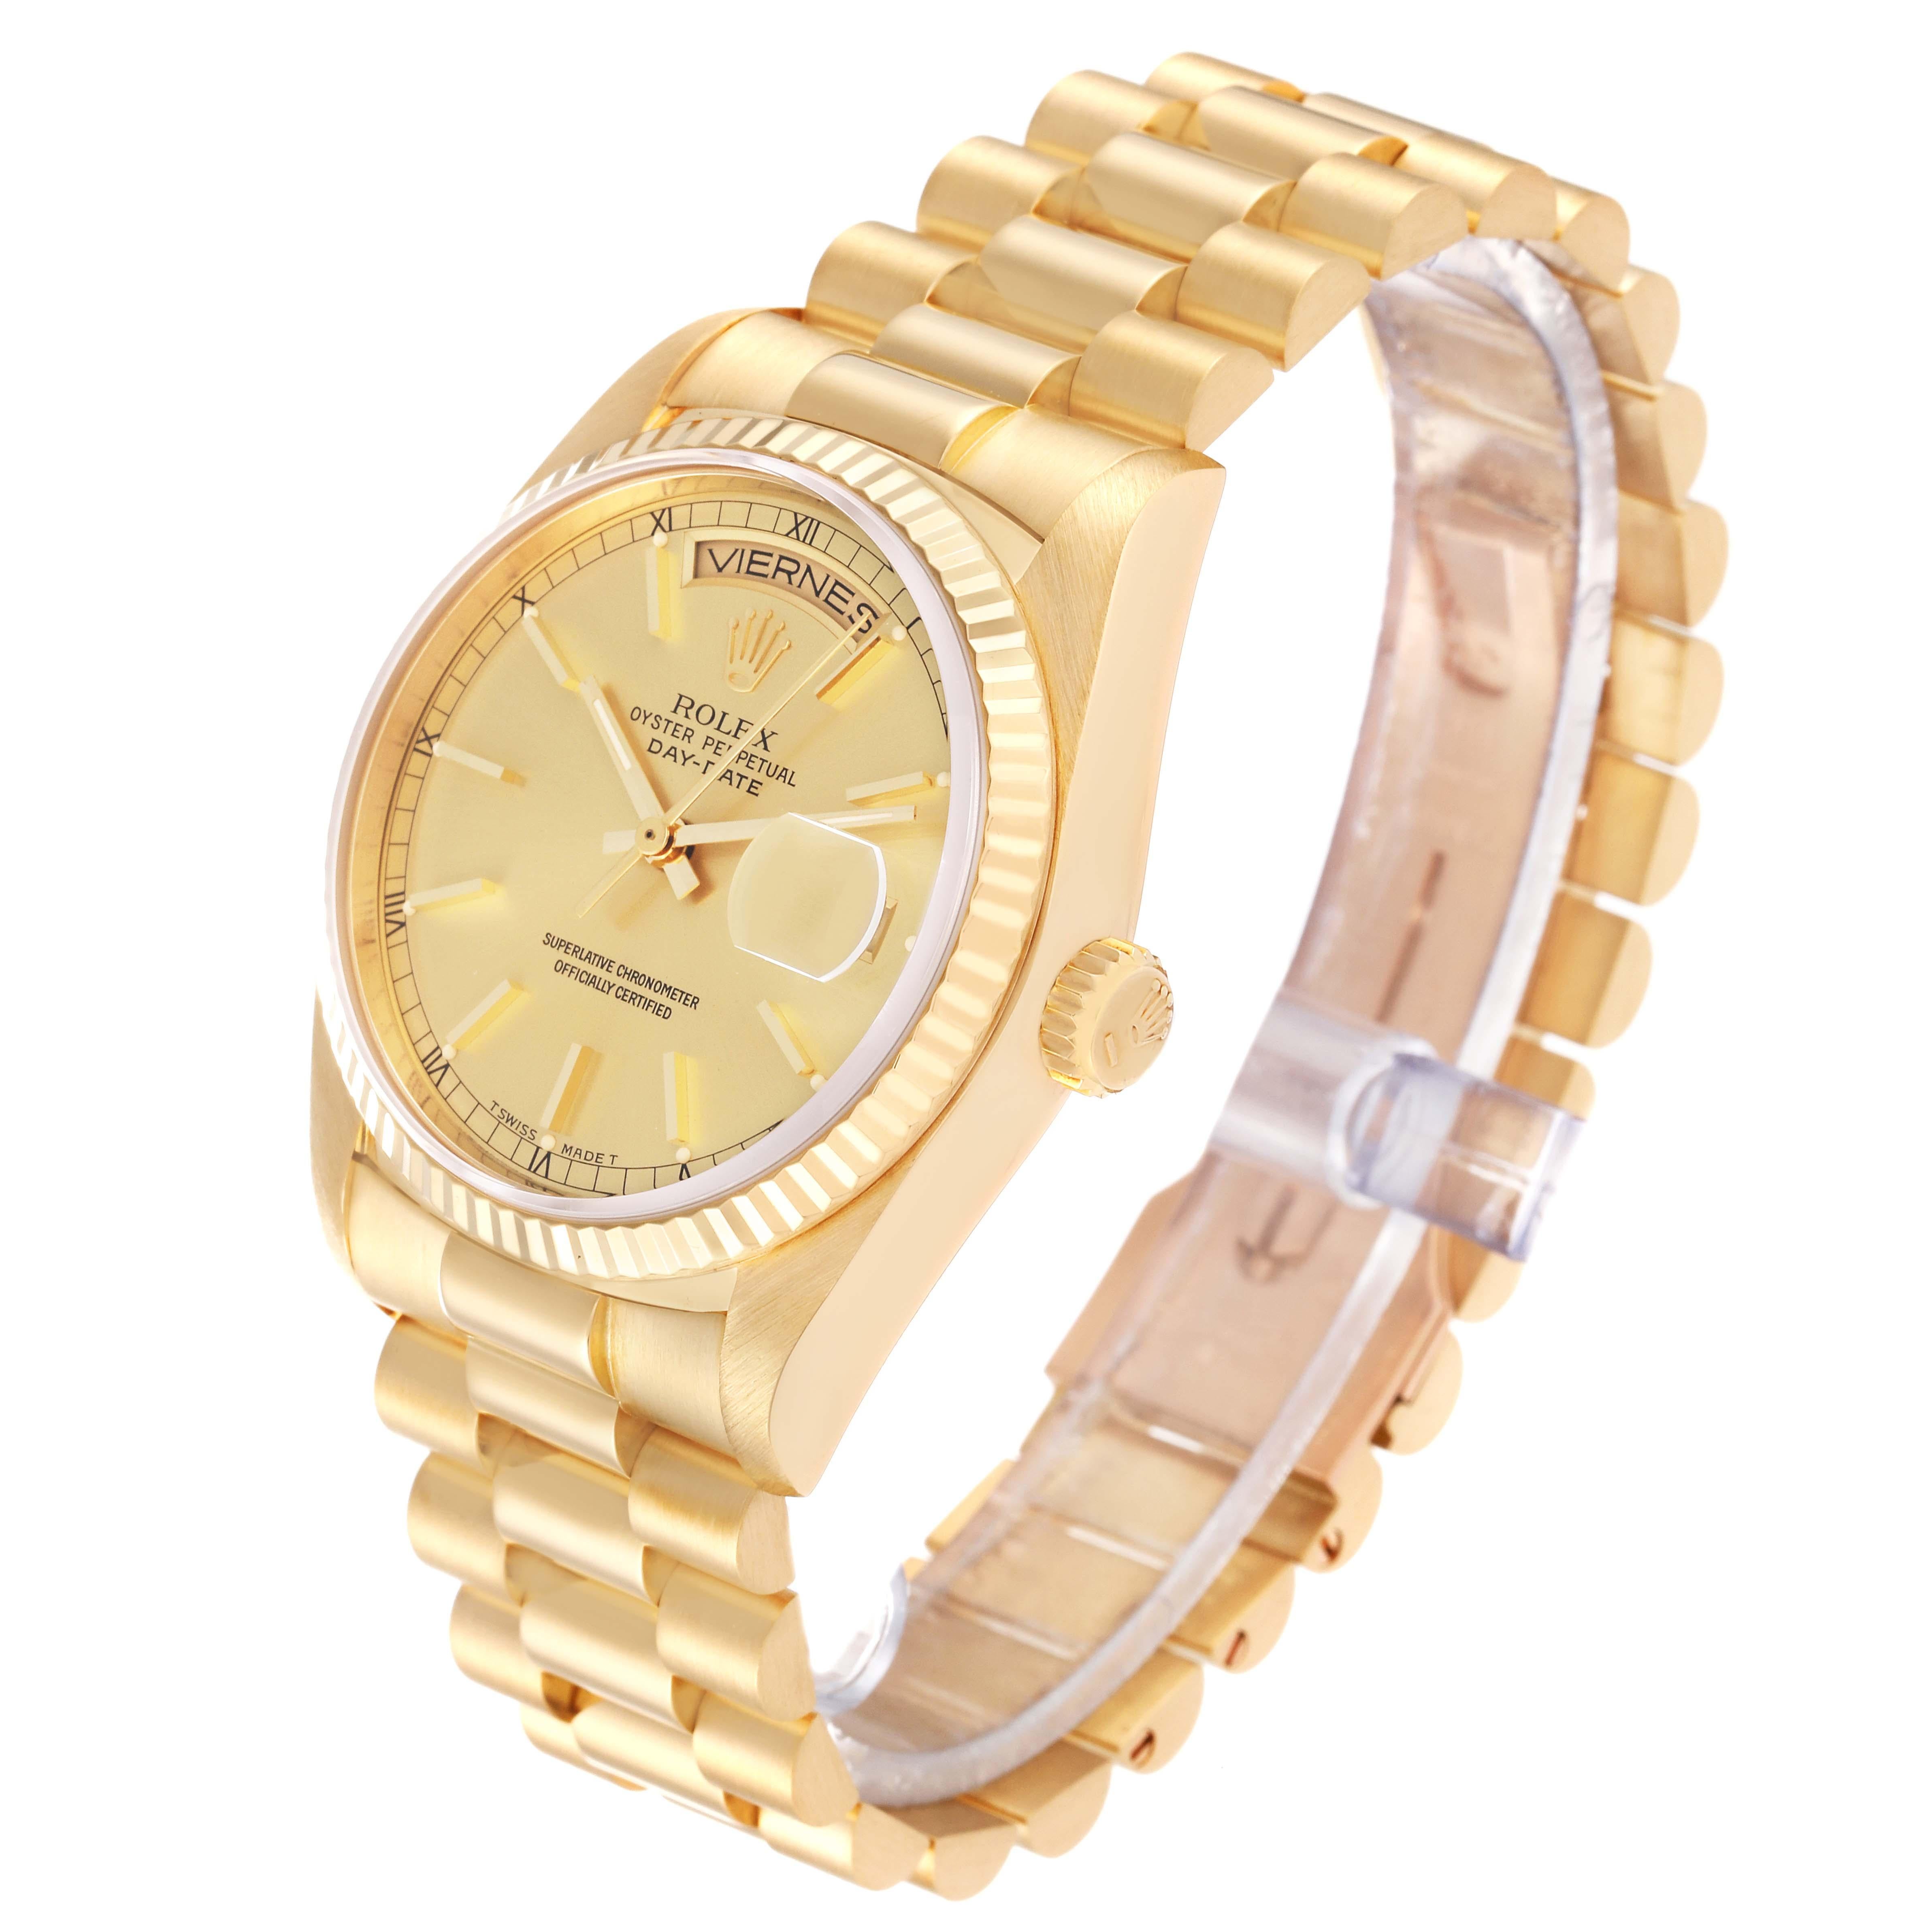 Rolex President Day-Date Yellow Gold Champagne Dial Mens Watch 18038 5